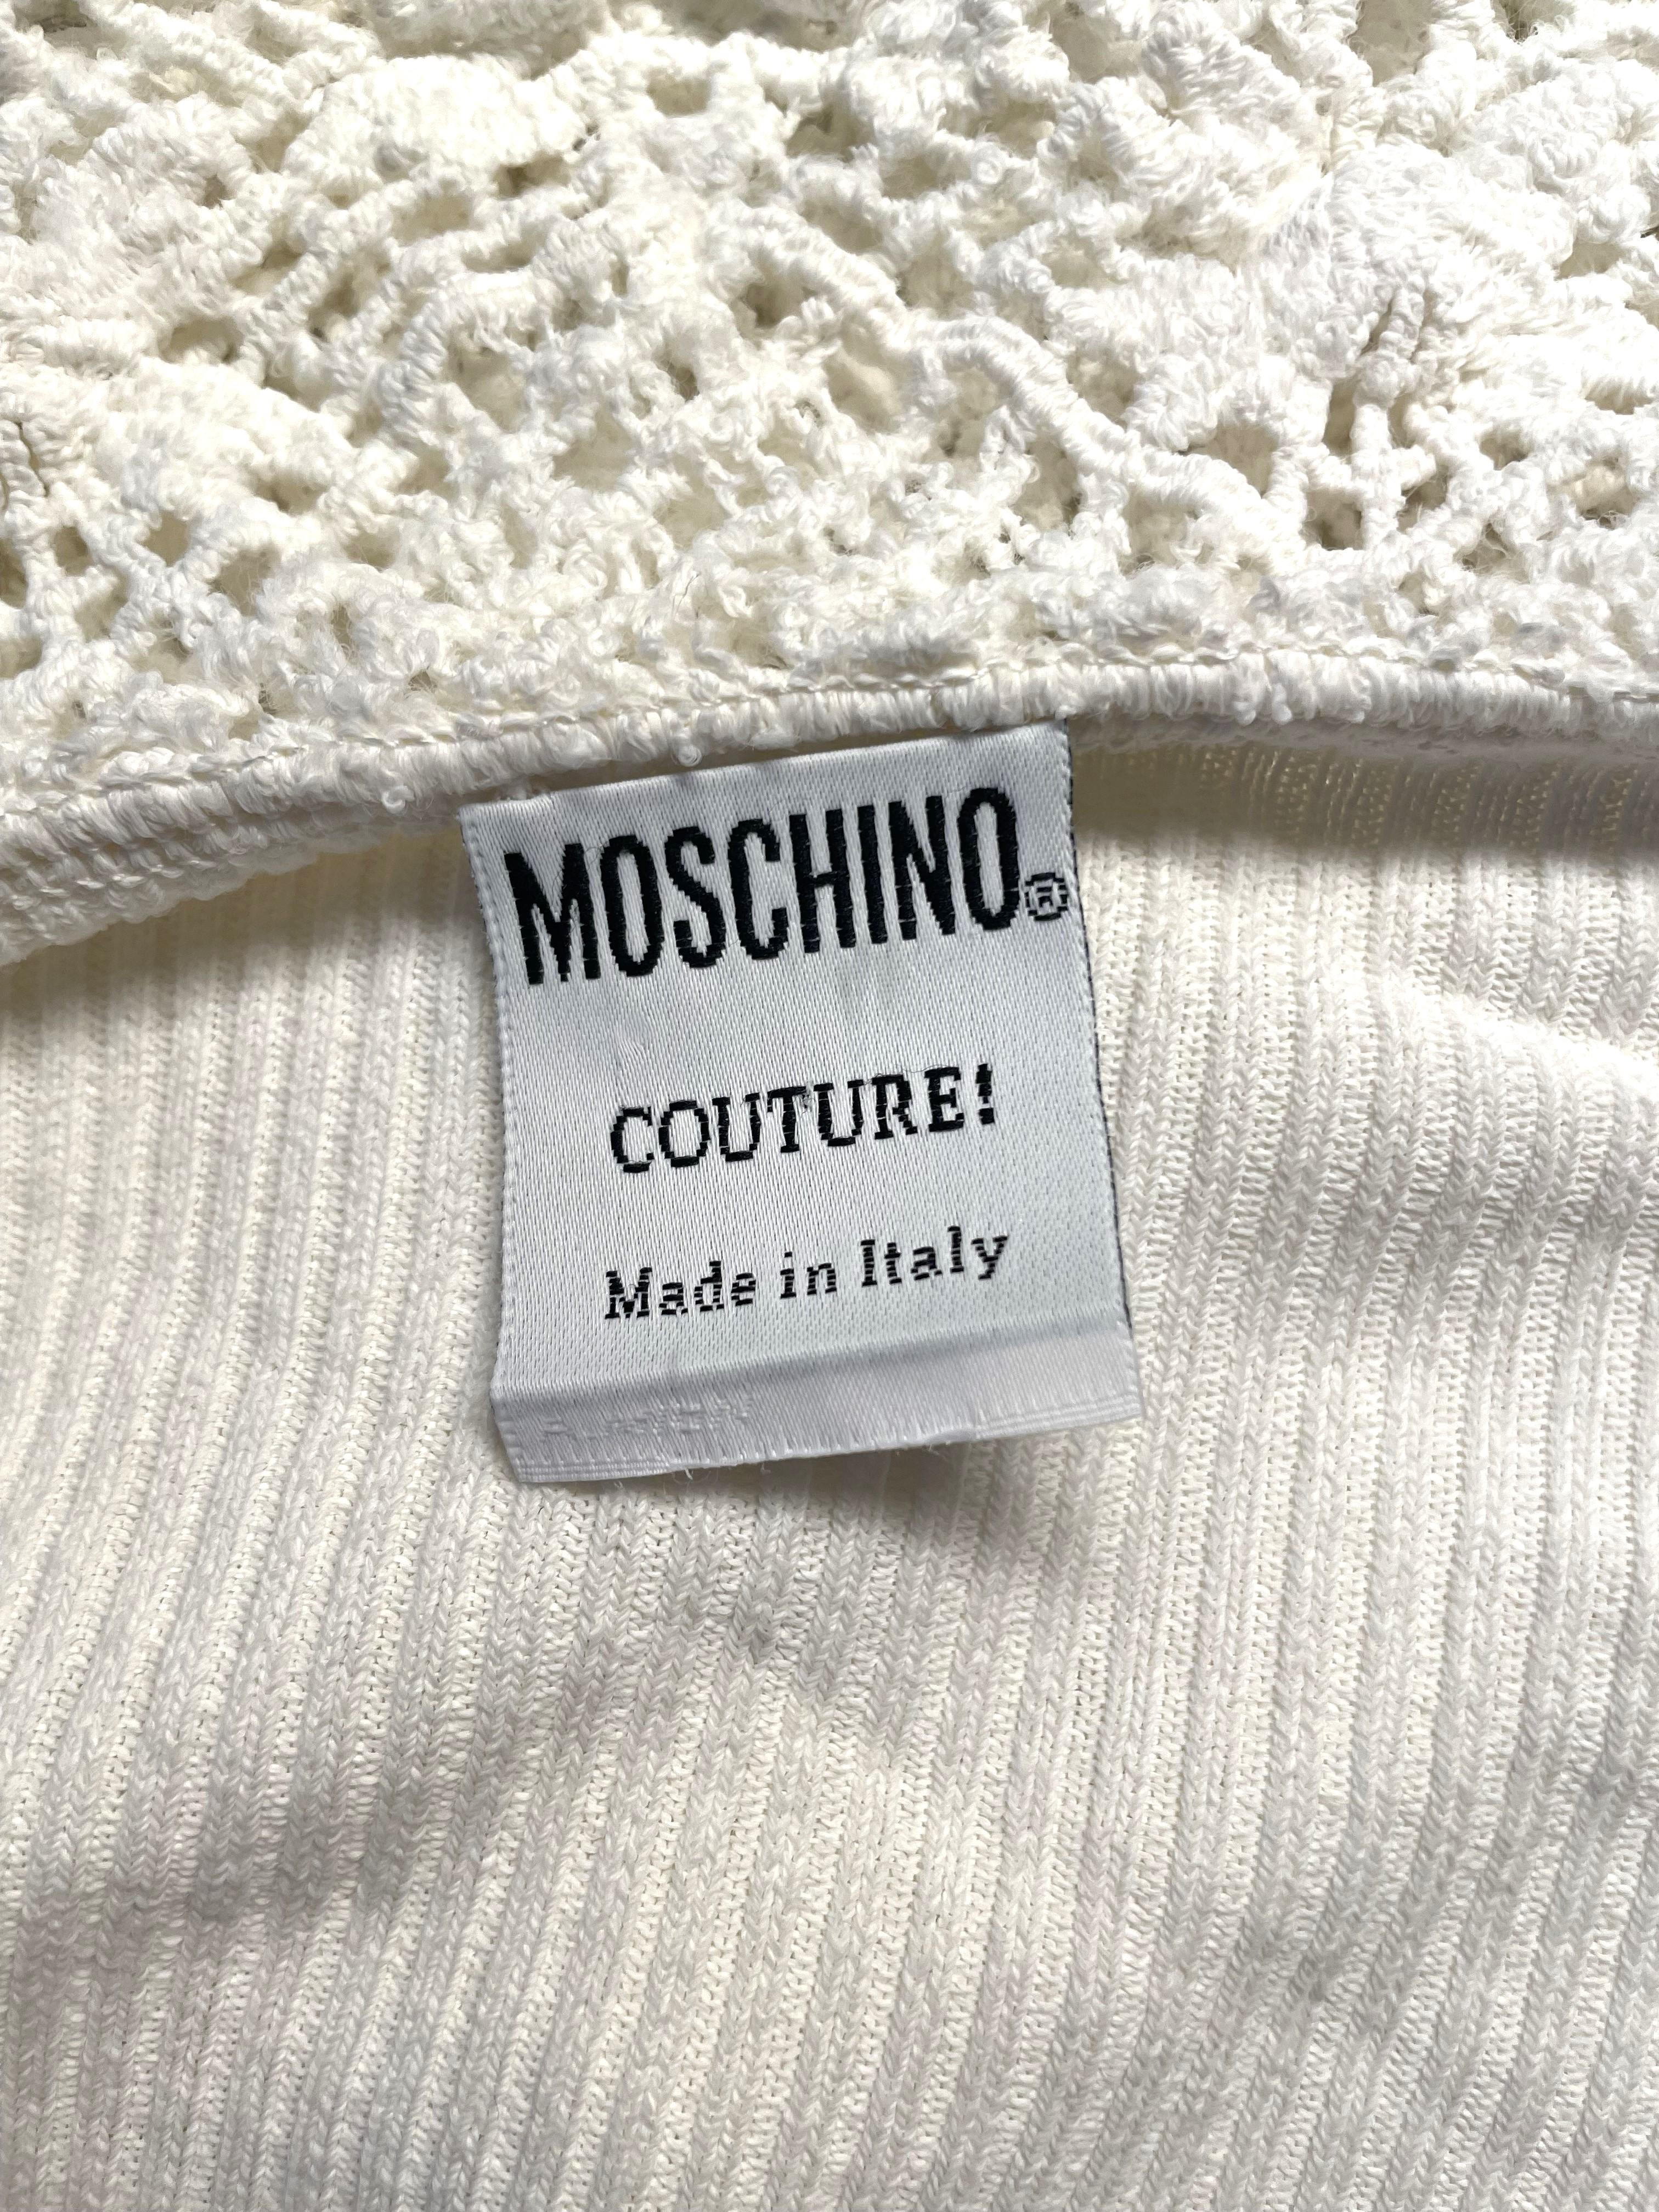 Moschino Couture 90s Cardigan Vest White Crocheted For Sale 2